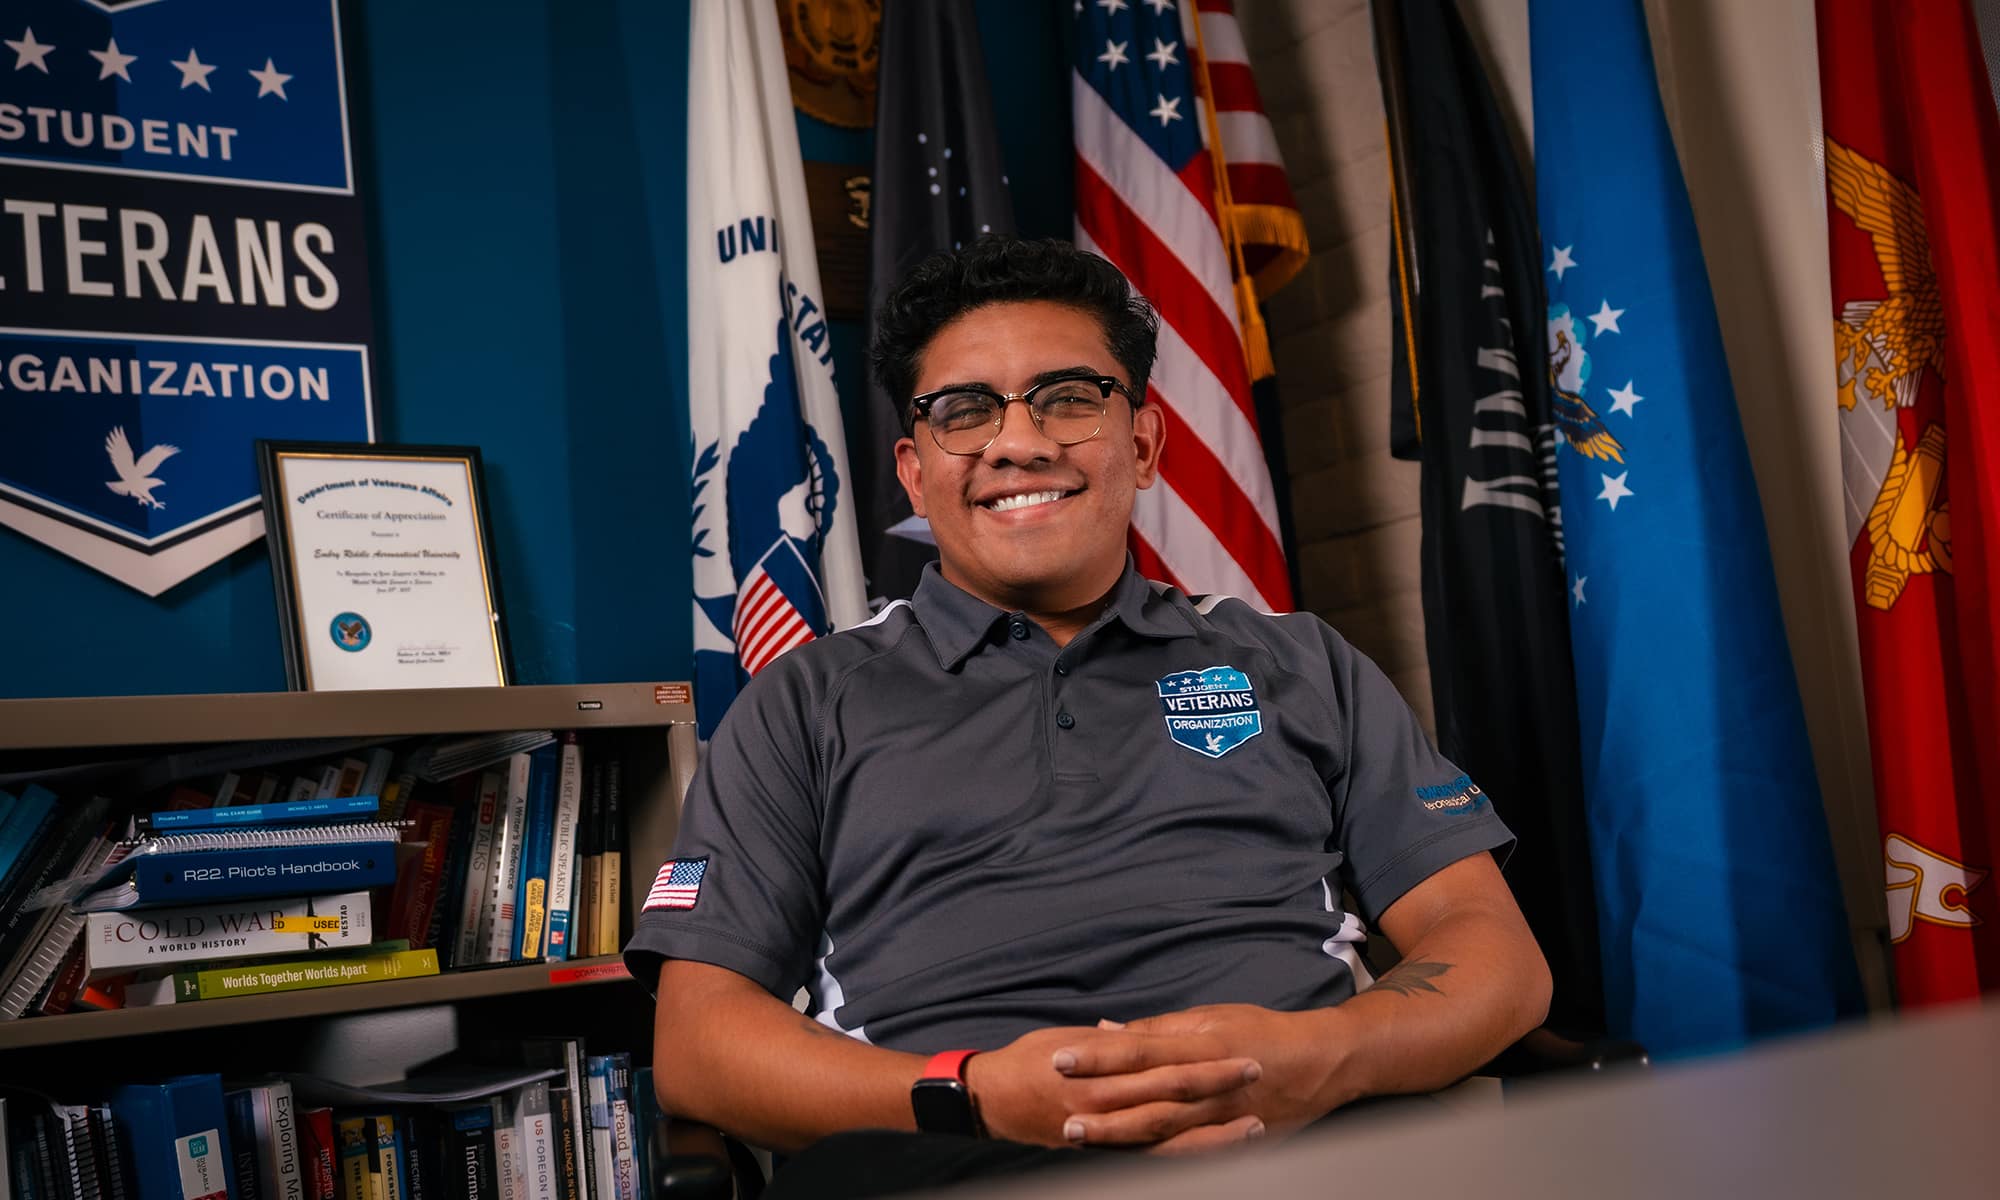 Vincent Becerra in the Student Veterans Organization office on the Prescott Campus. (Photo: Embry-Riddle/Connor McShane)